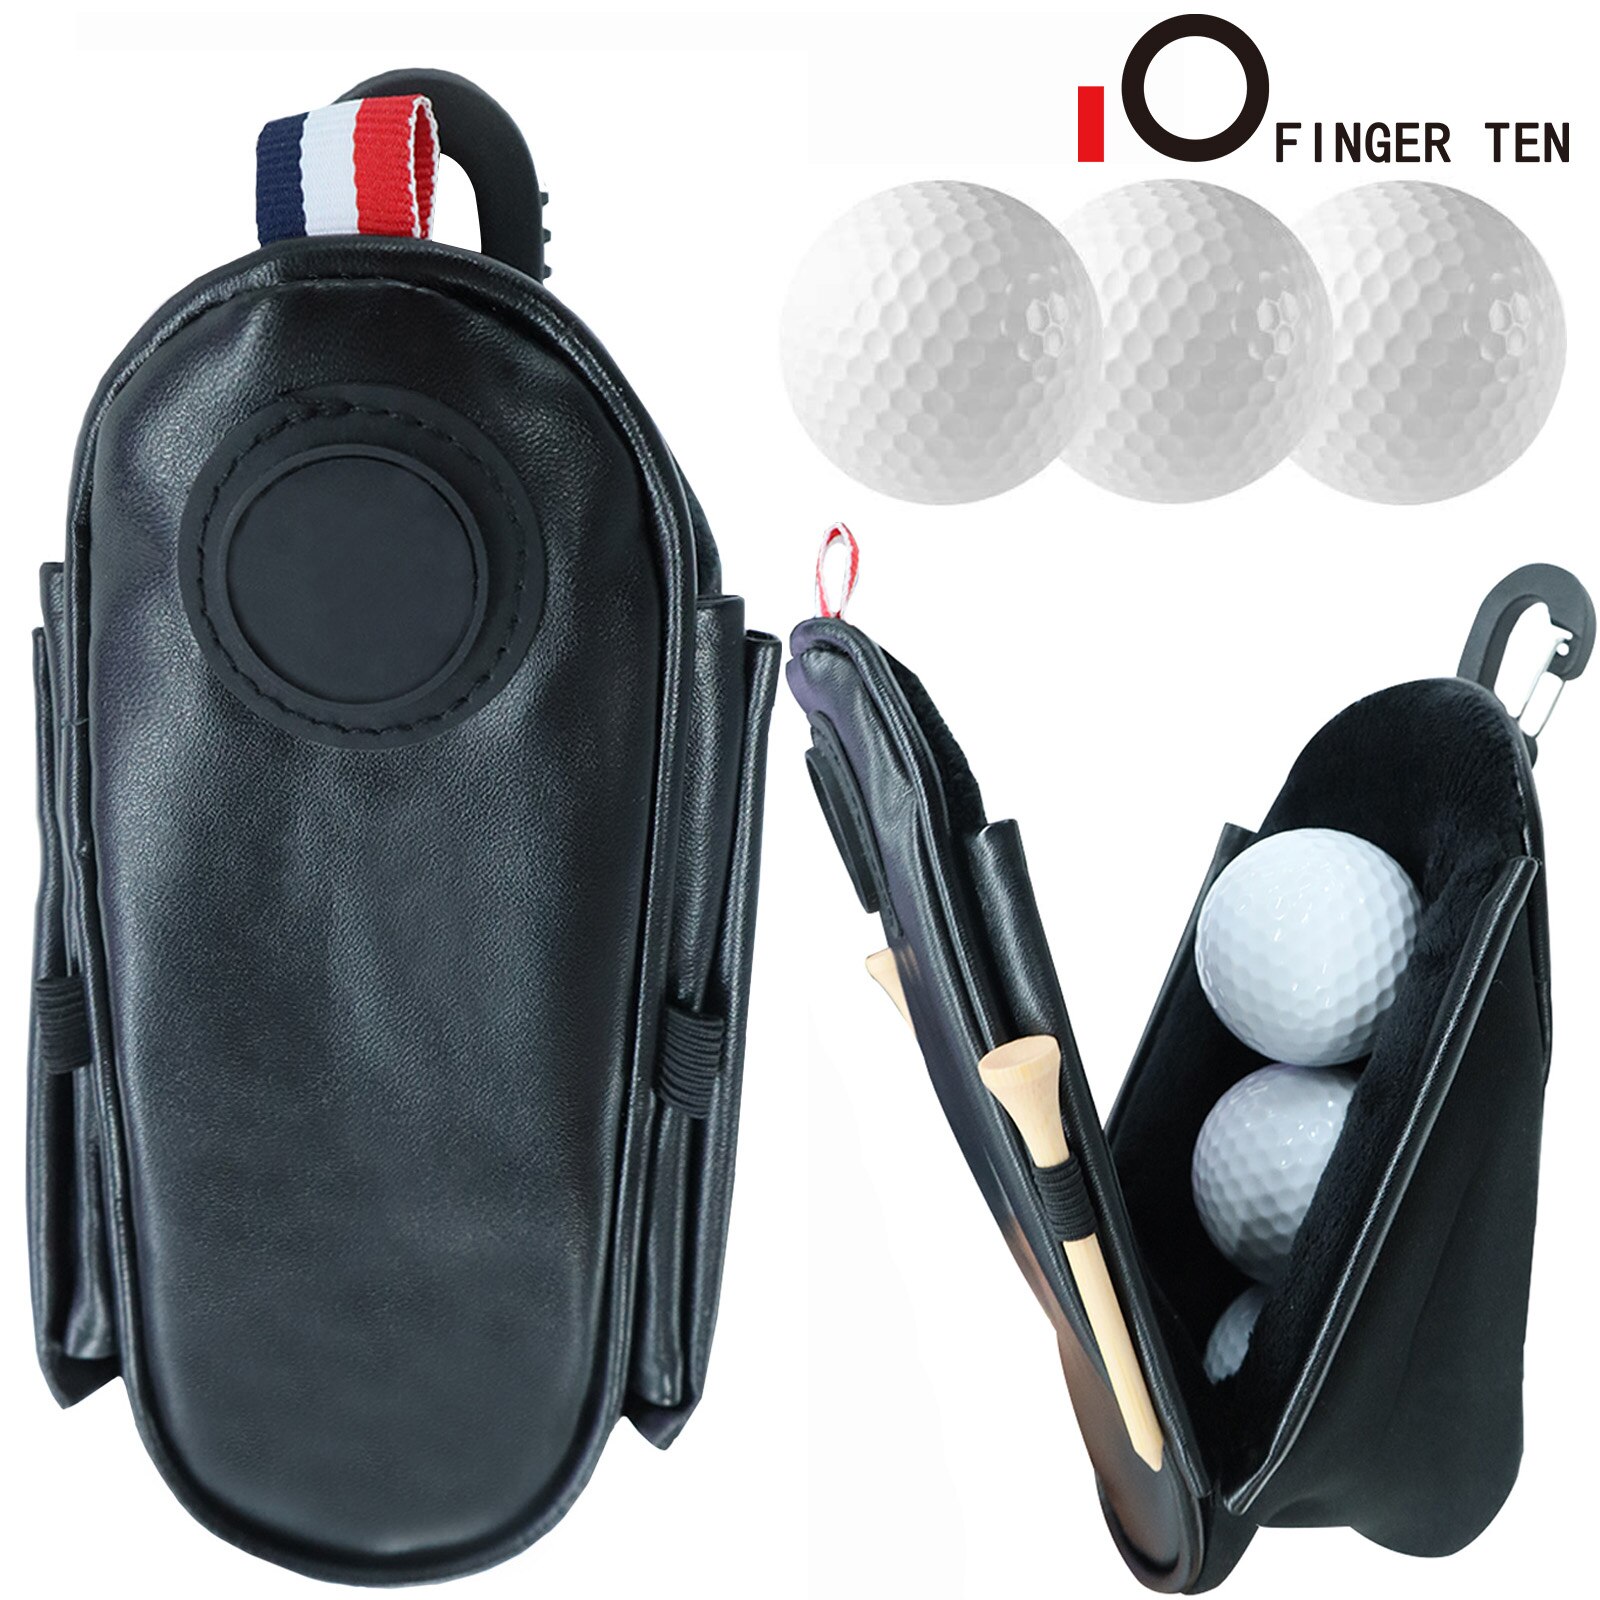 Mini Draagbare Golfbal Bag Riem Leer Taille Pouch Storage Container Houder Pouch Tassen Clip Golfer